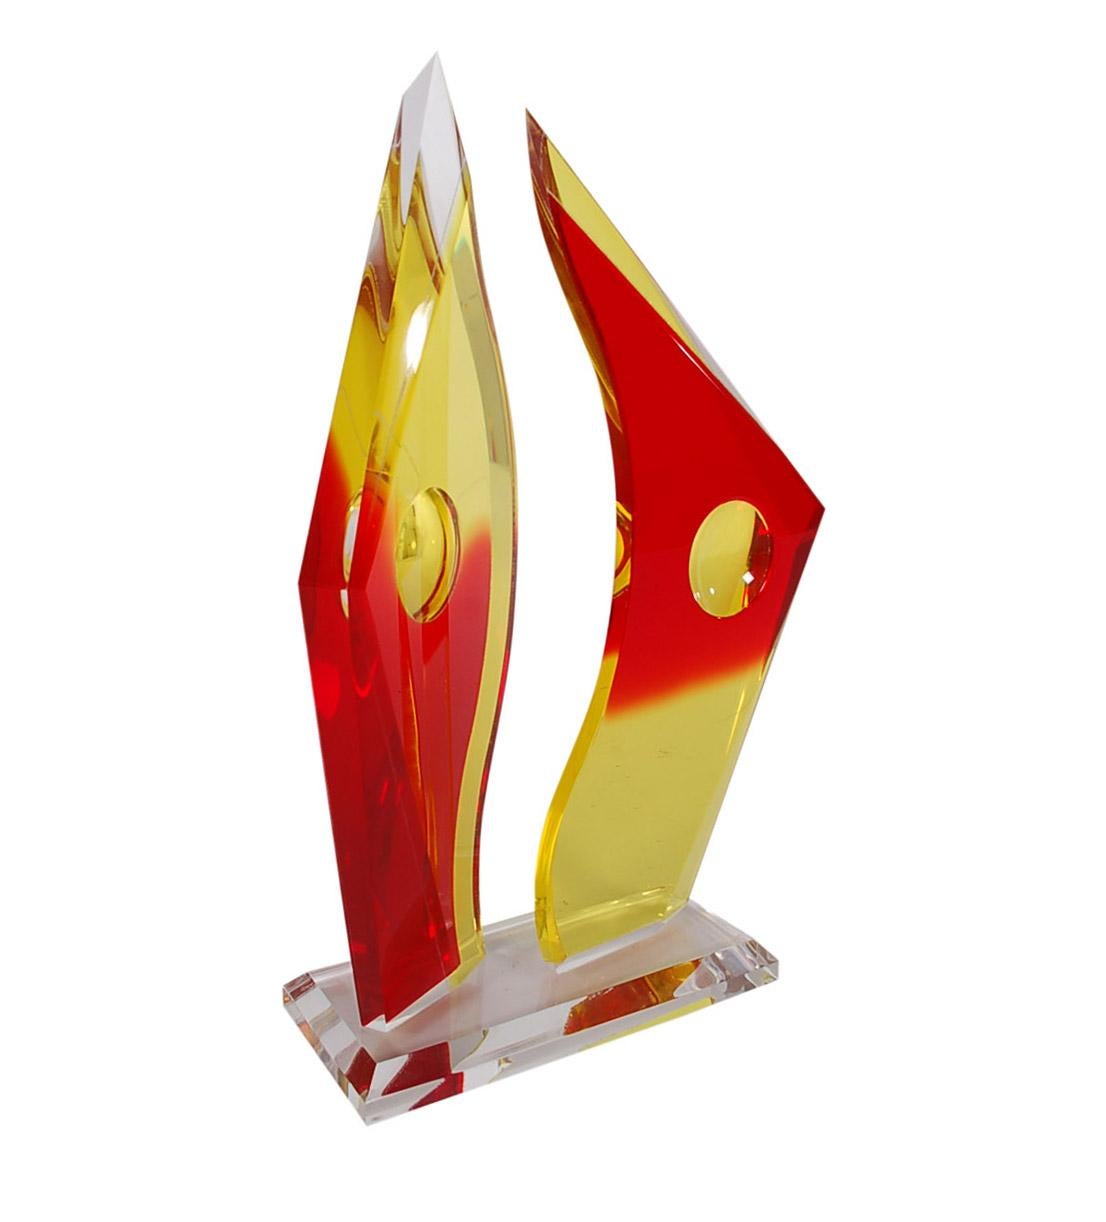 A beautiful and impressive Lucite table sculpture in yellow and red colored acrylic. The table sculpture features two abstract forms on a thick base. Large substantial piece. Signed Vincent. Edition 1 of 299.